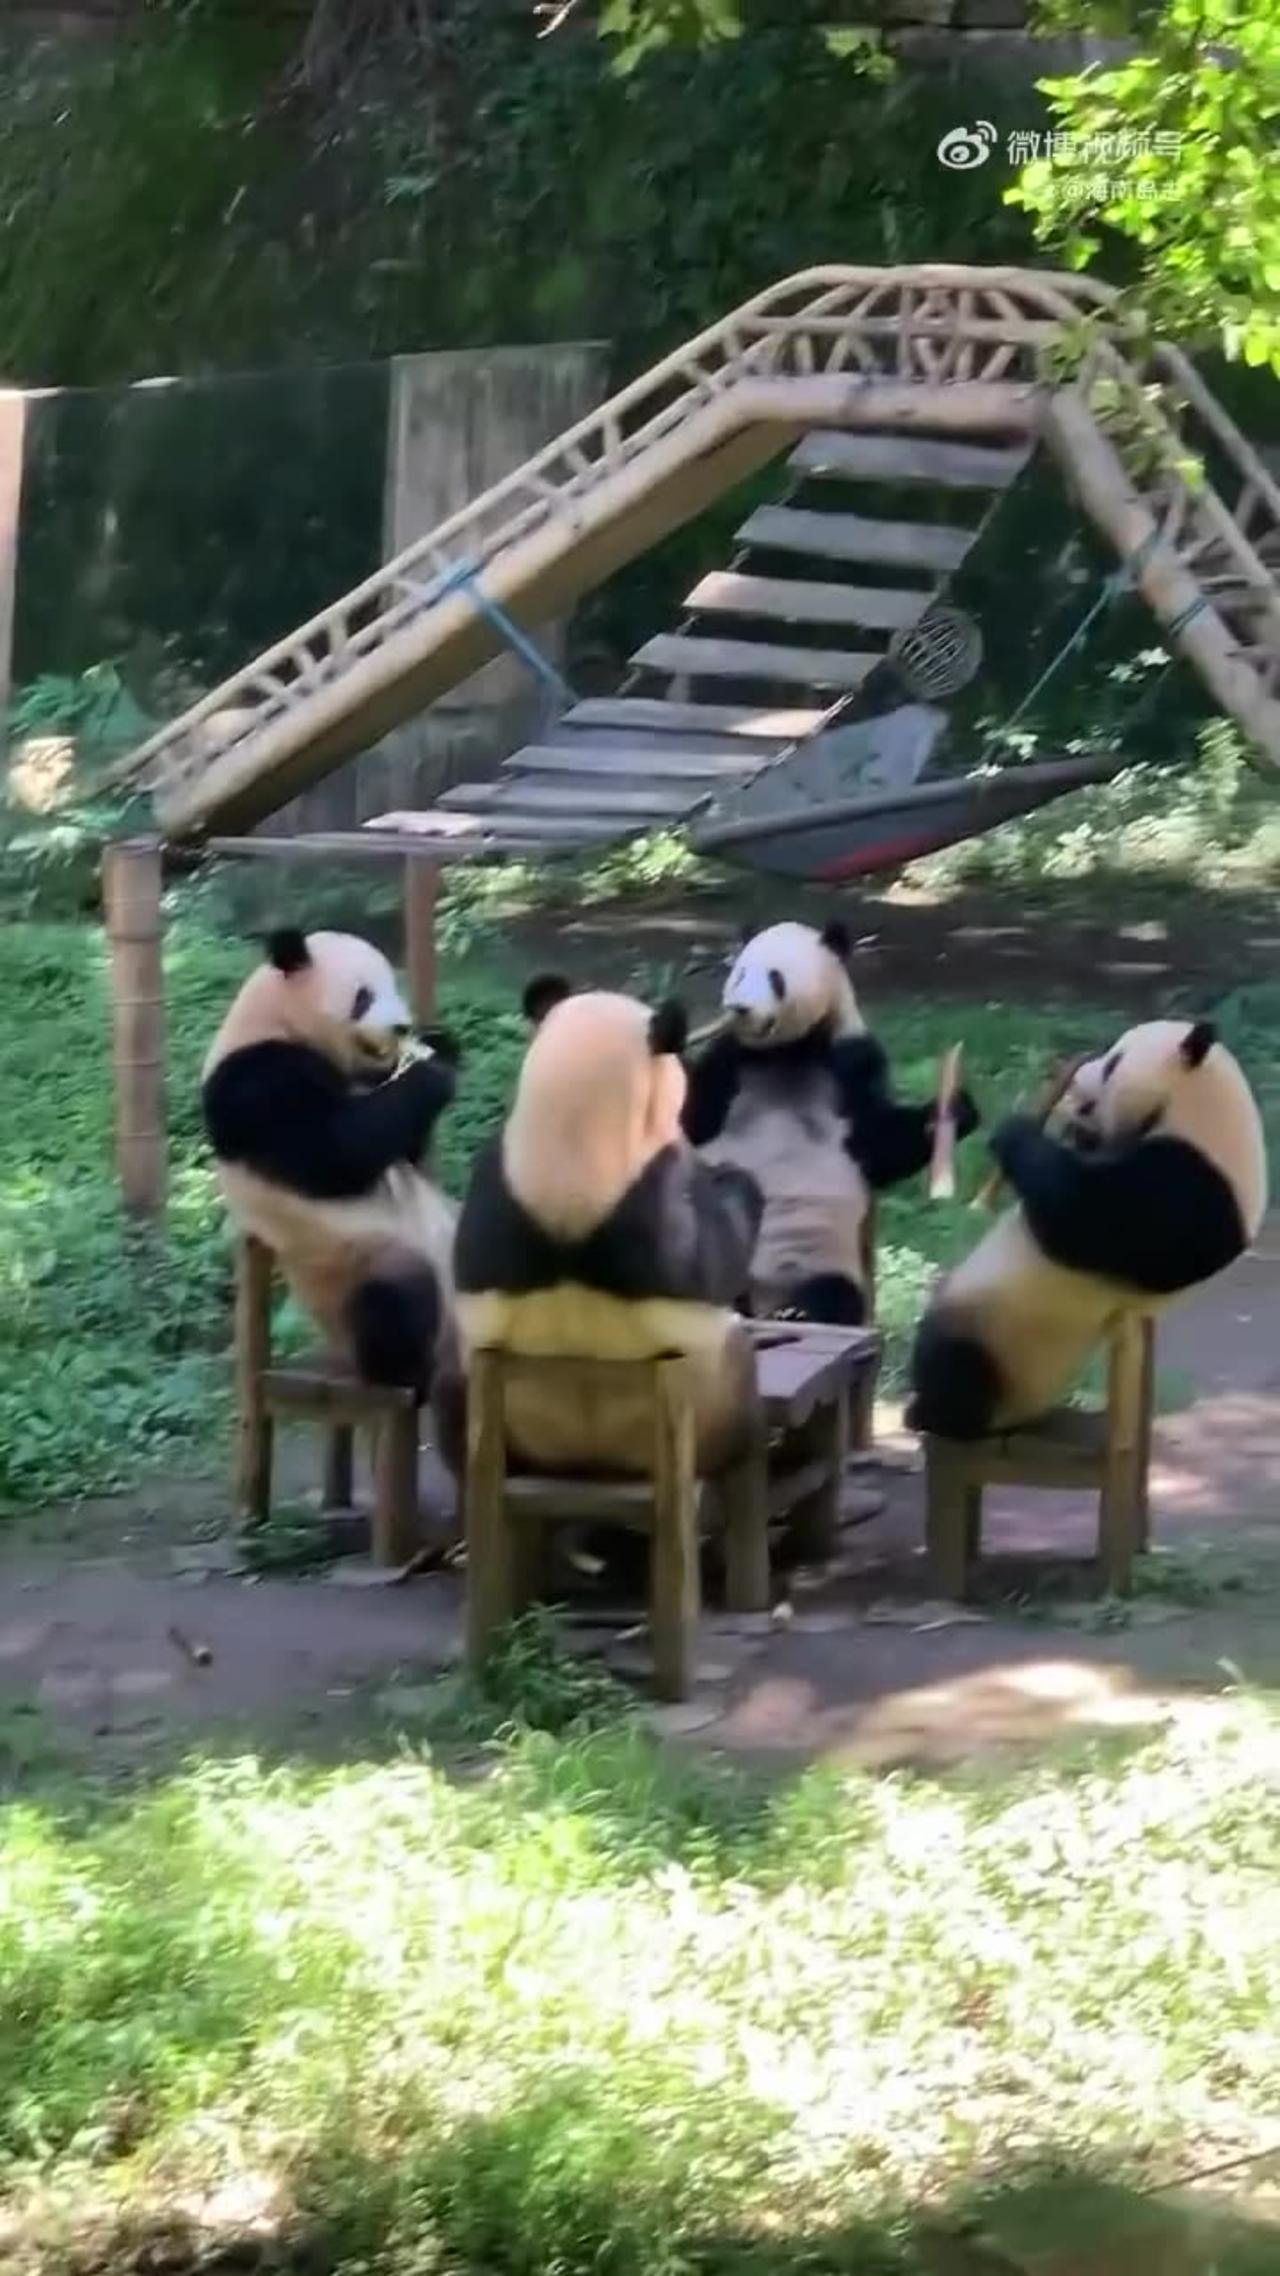 "Pandas' Dining Table Adventure: A Cute and Delightful Feast"